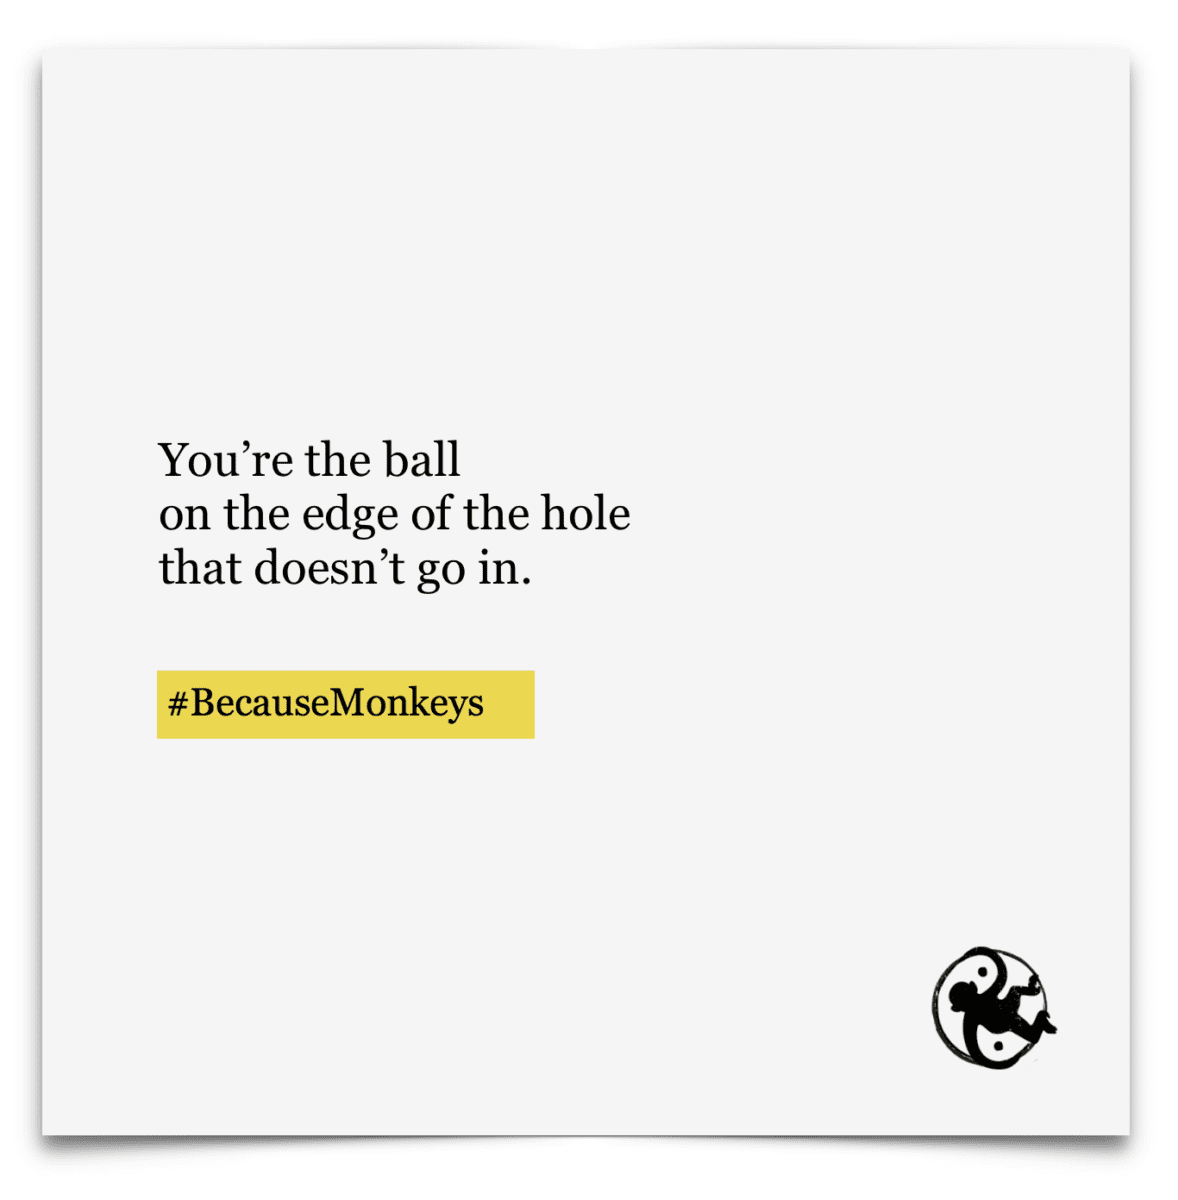 You’re the ball on the edge of the hole that doesn’t go in.